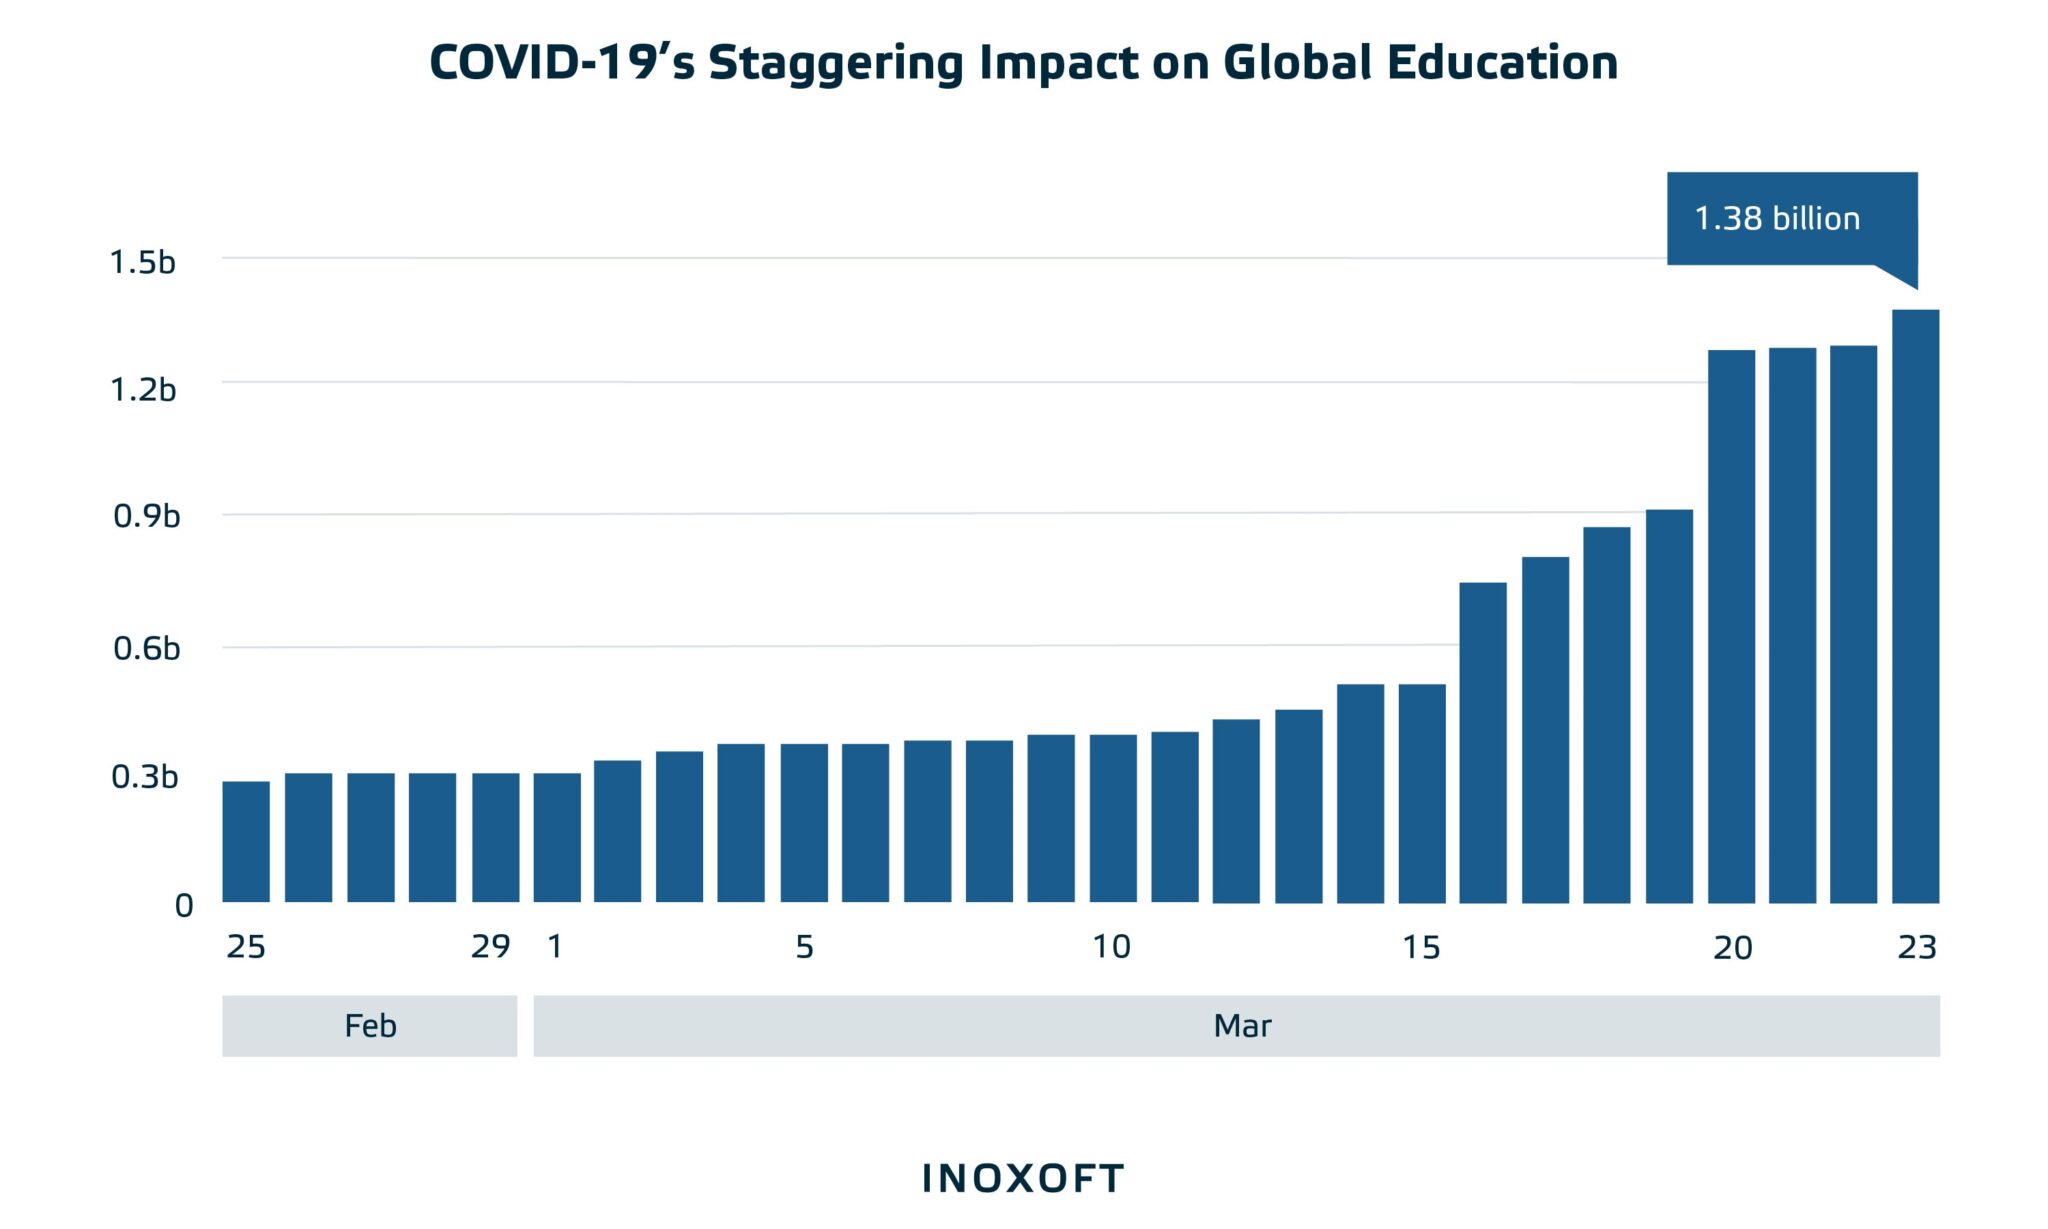 COVID-19's Staggering Impact on Global Education